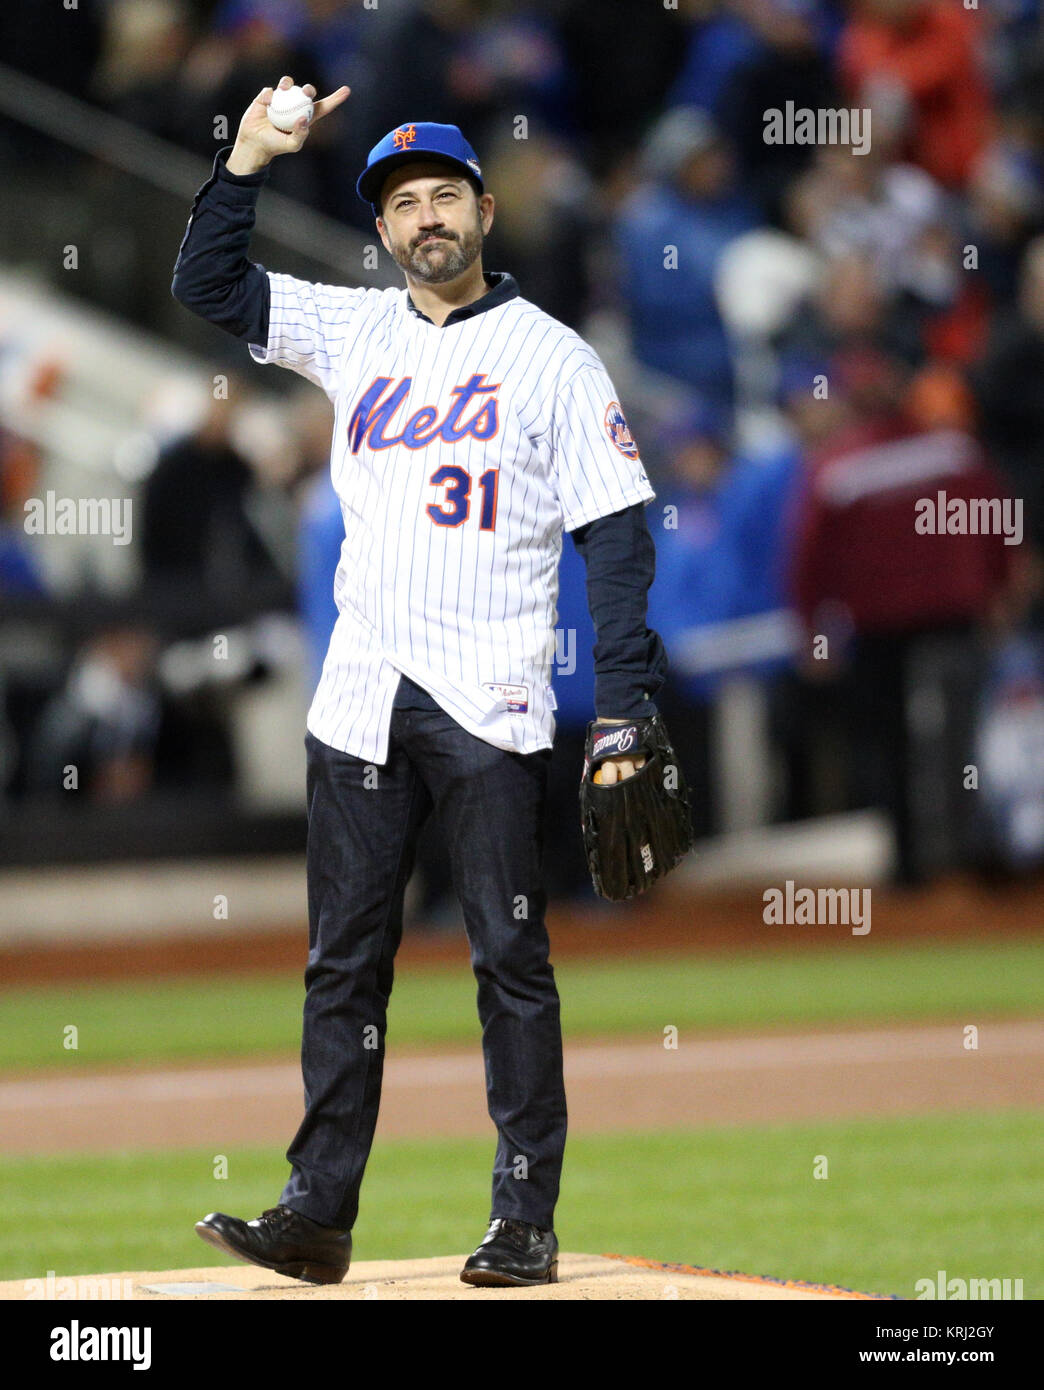 NEW YORK, NY - OCTOBER 18: Television host Jimmy Kimmel waves to the crowd prior to his first pitch before game two of the 2015 MLB National League Championship Series between the Chicago Cubs and the New York Mets at Citi Field on October 18, 2015 in the Flushing neighborhood of the Queens borough of New York City.   People:  Jimmy Kimmel Stock Photo